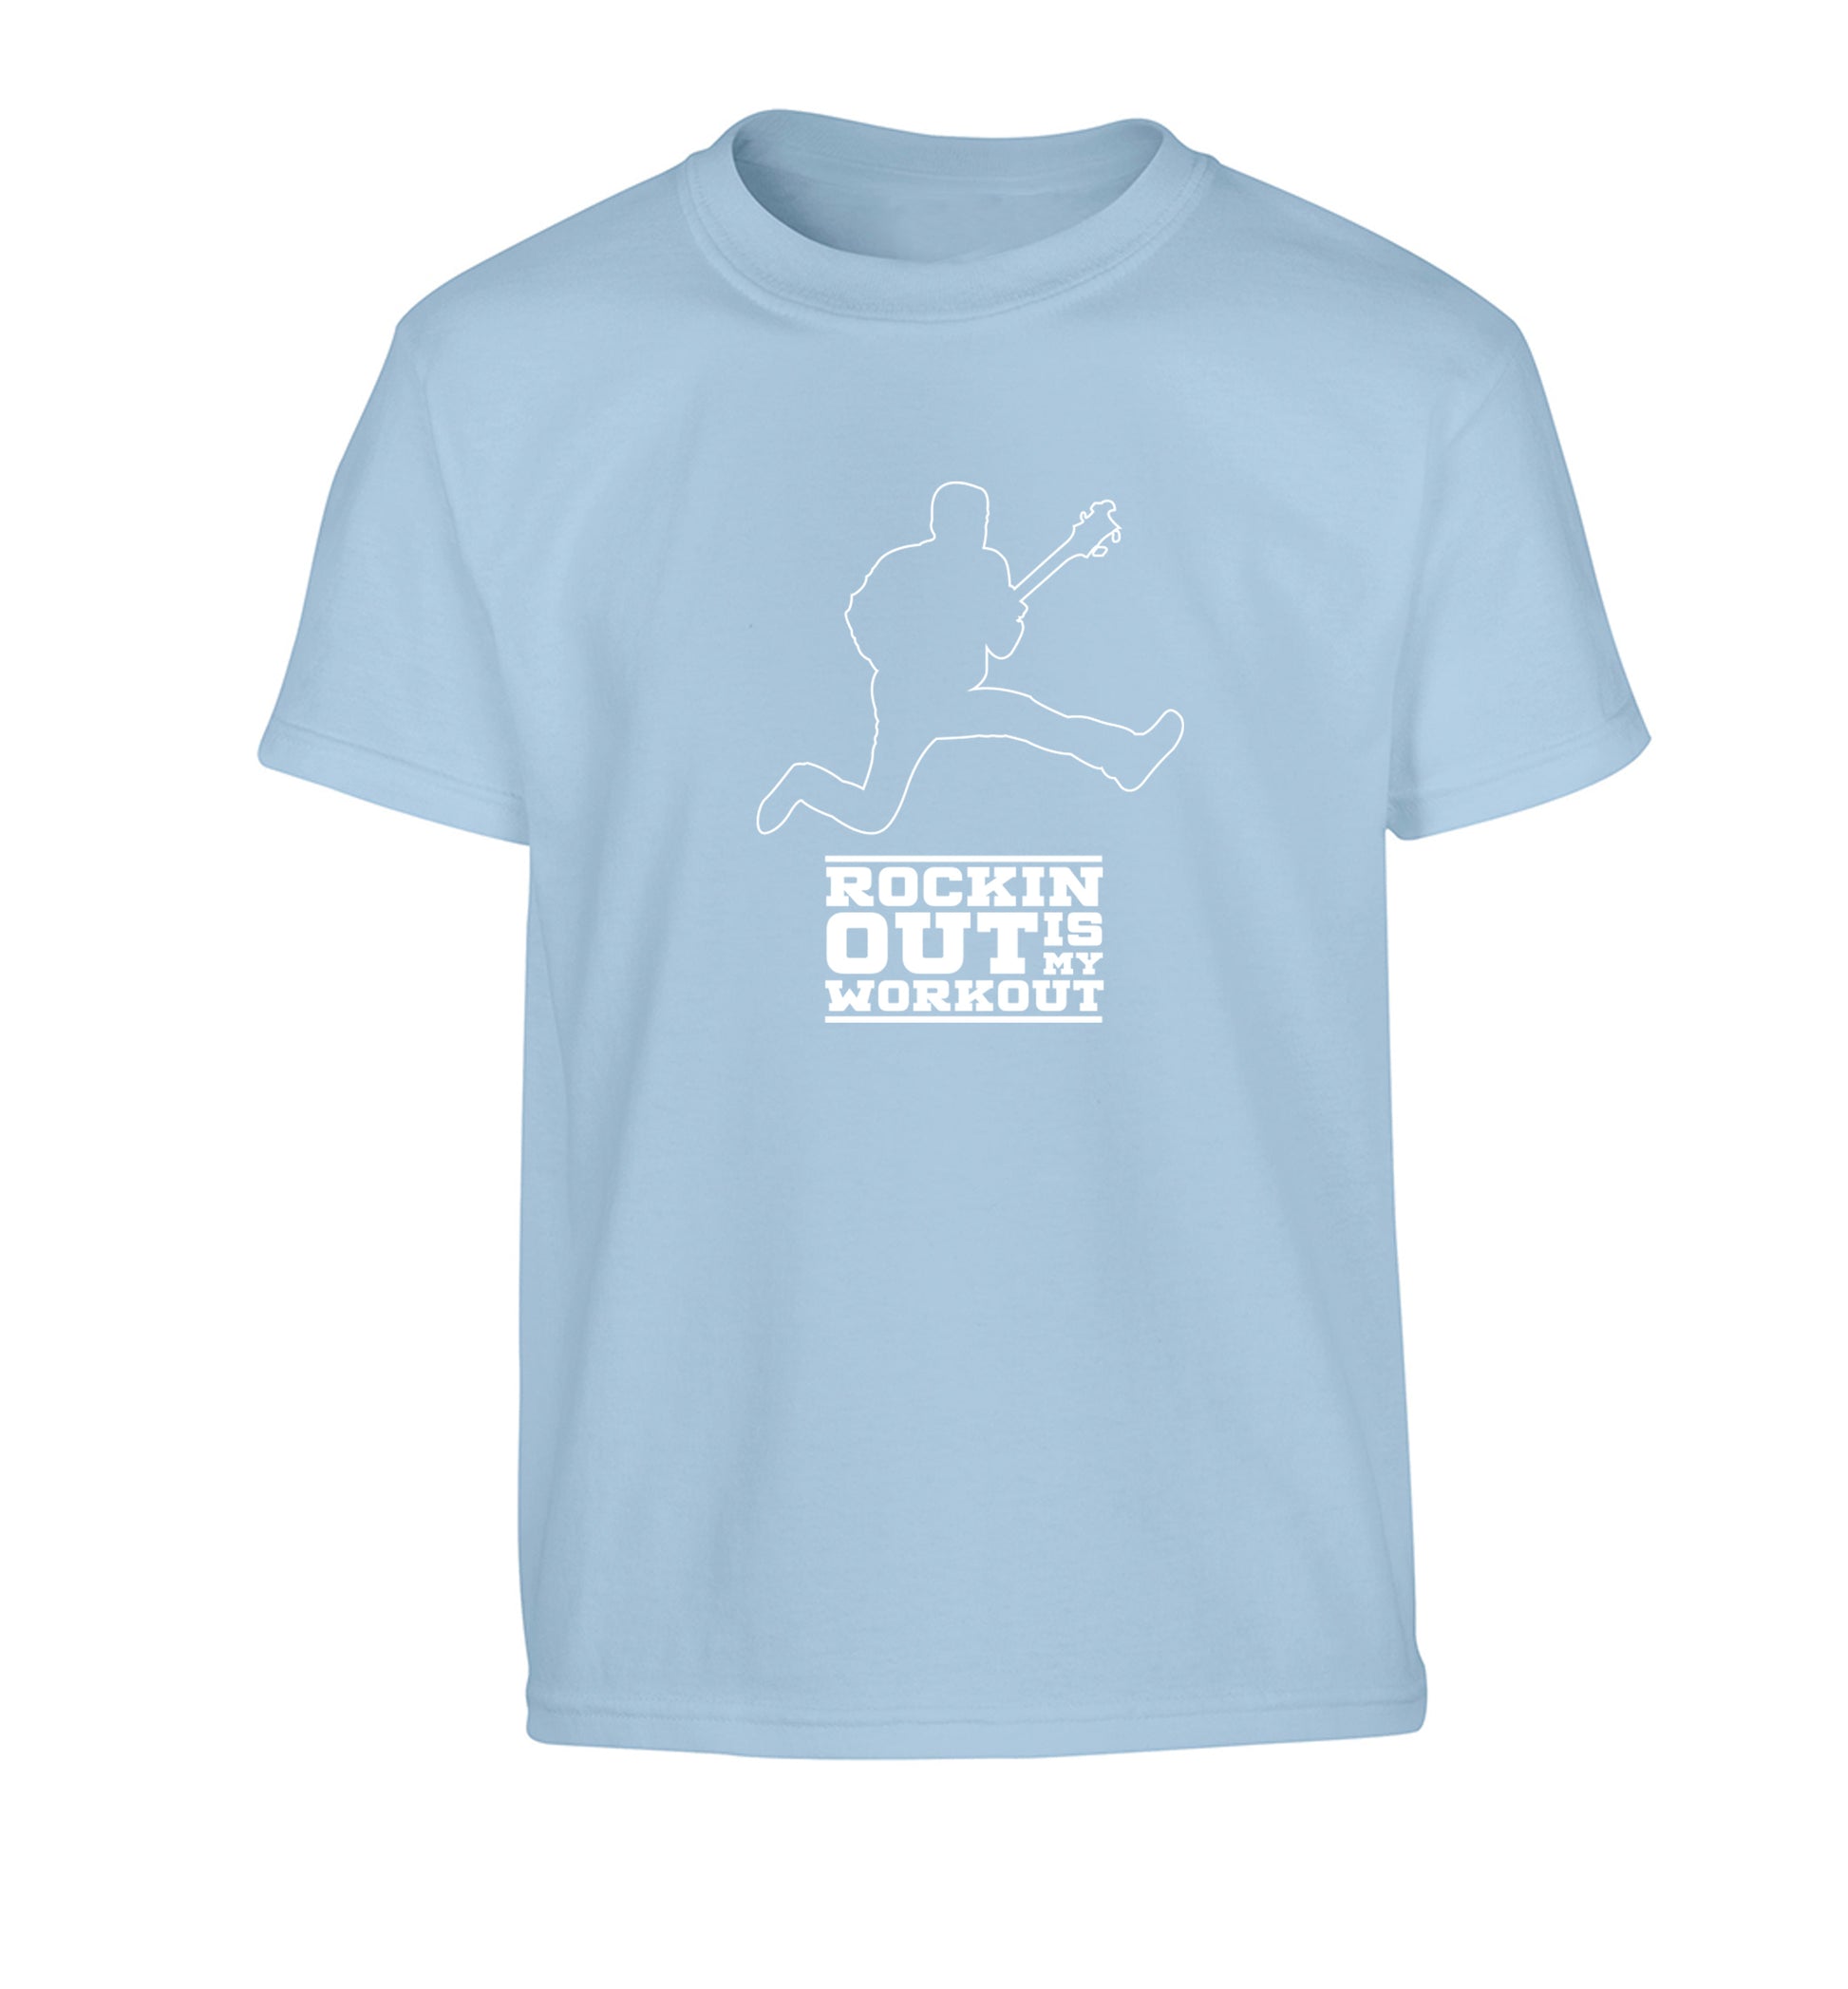 Rockin out is my workout 2 Children's light blue Tshirt 12-13 Years